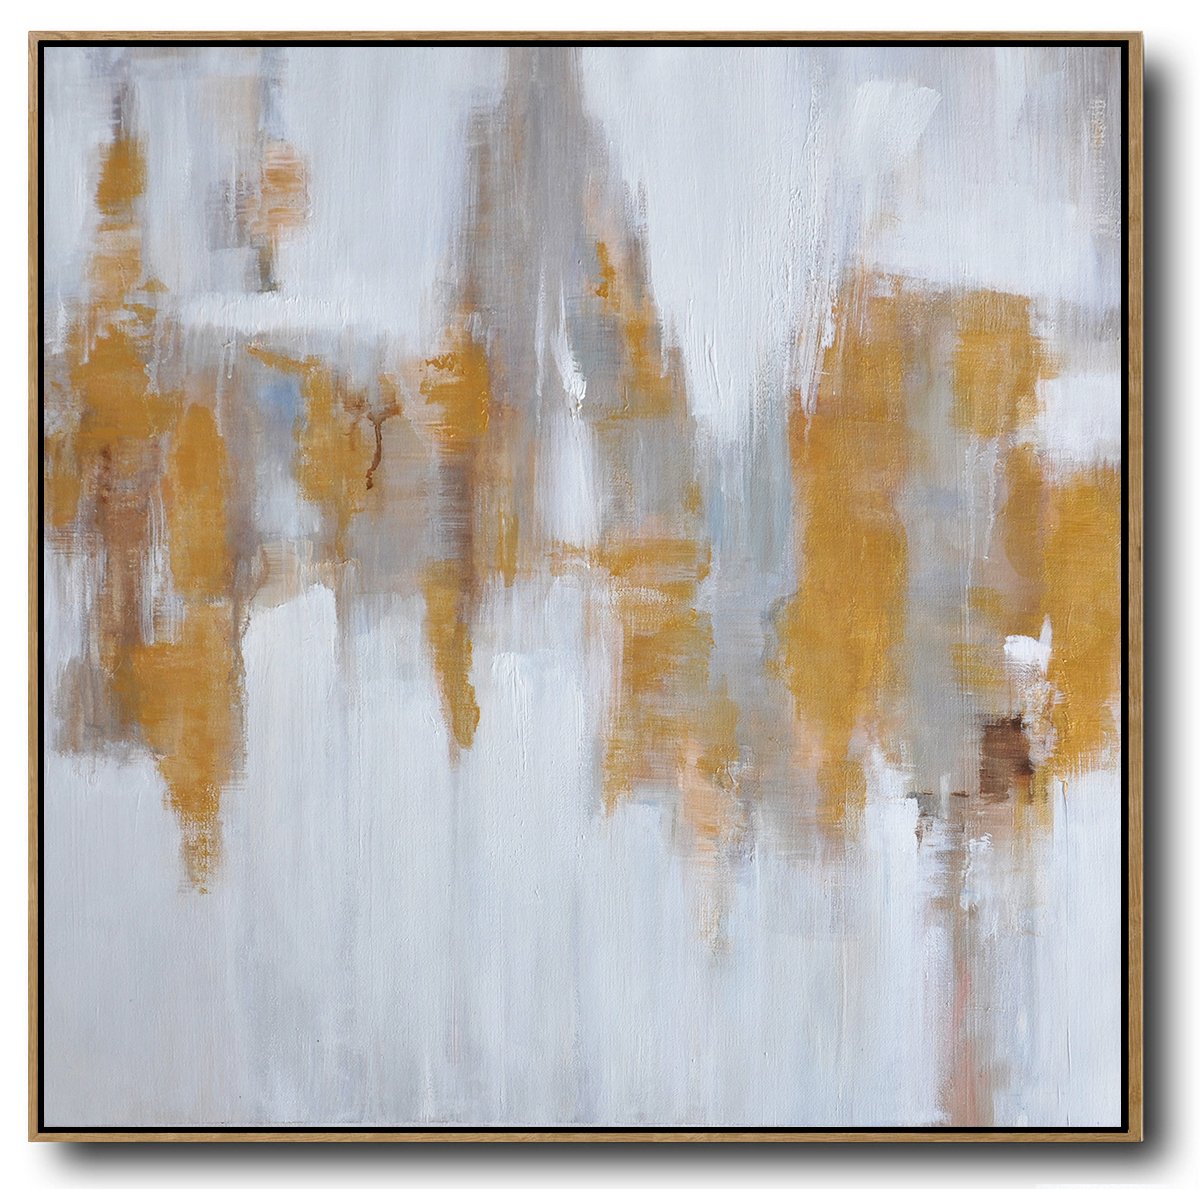 Extra Large Acrylic Painting On Canvas,Large Abstract Landscape Oil Painting On Canvas,Large Abstract Wall Art,White,Gray,Yellow.etc